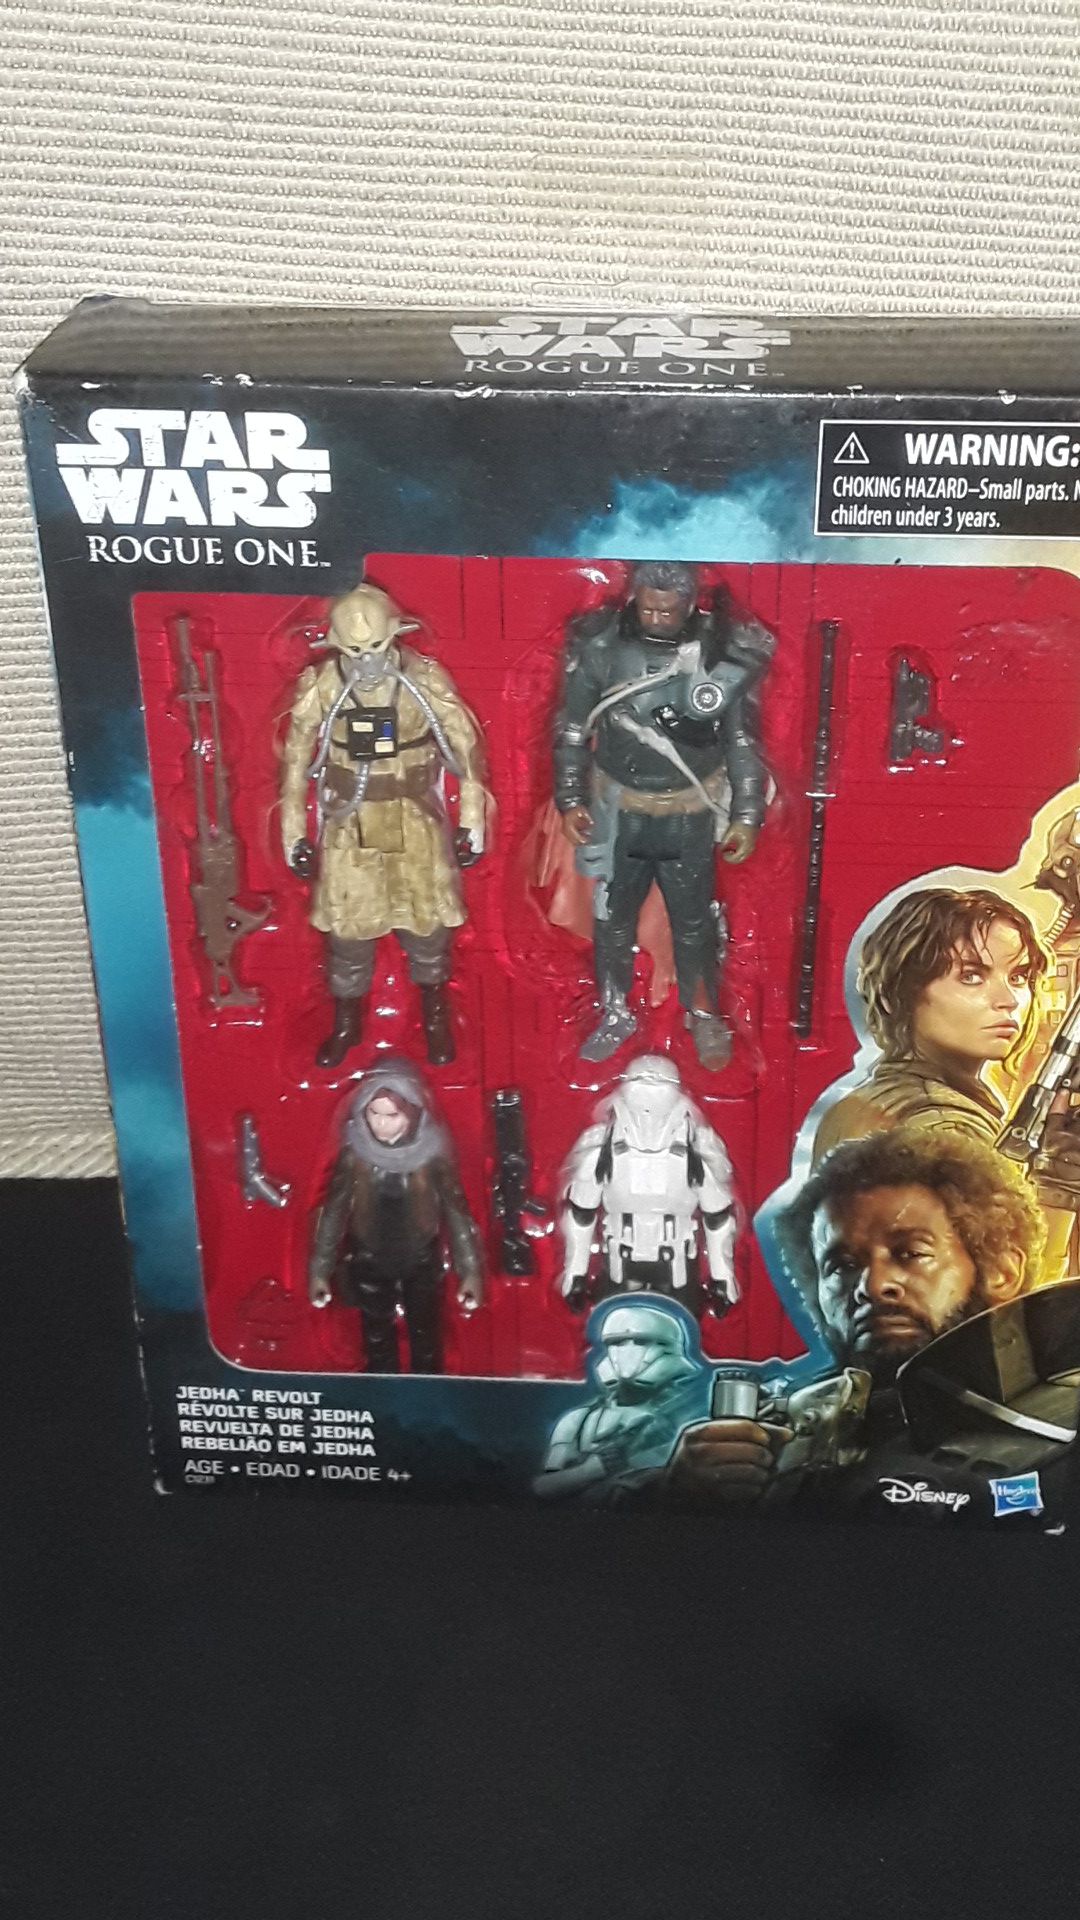 SALE STAR WARS ROGUE ONE 4 PACK NEW IN BOX